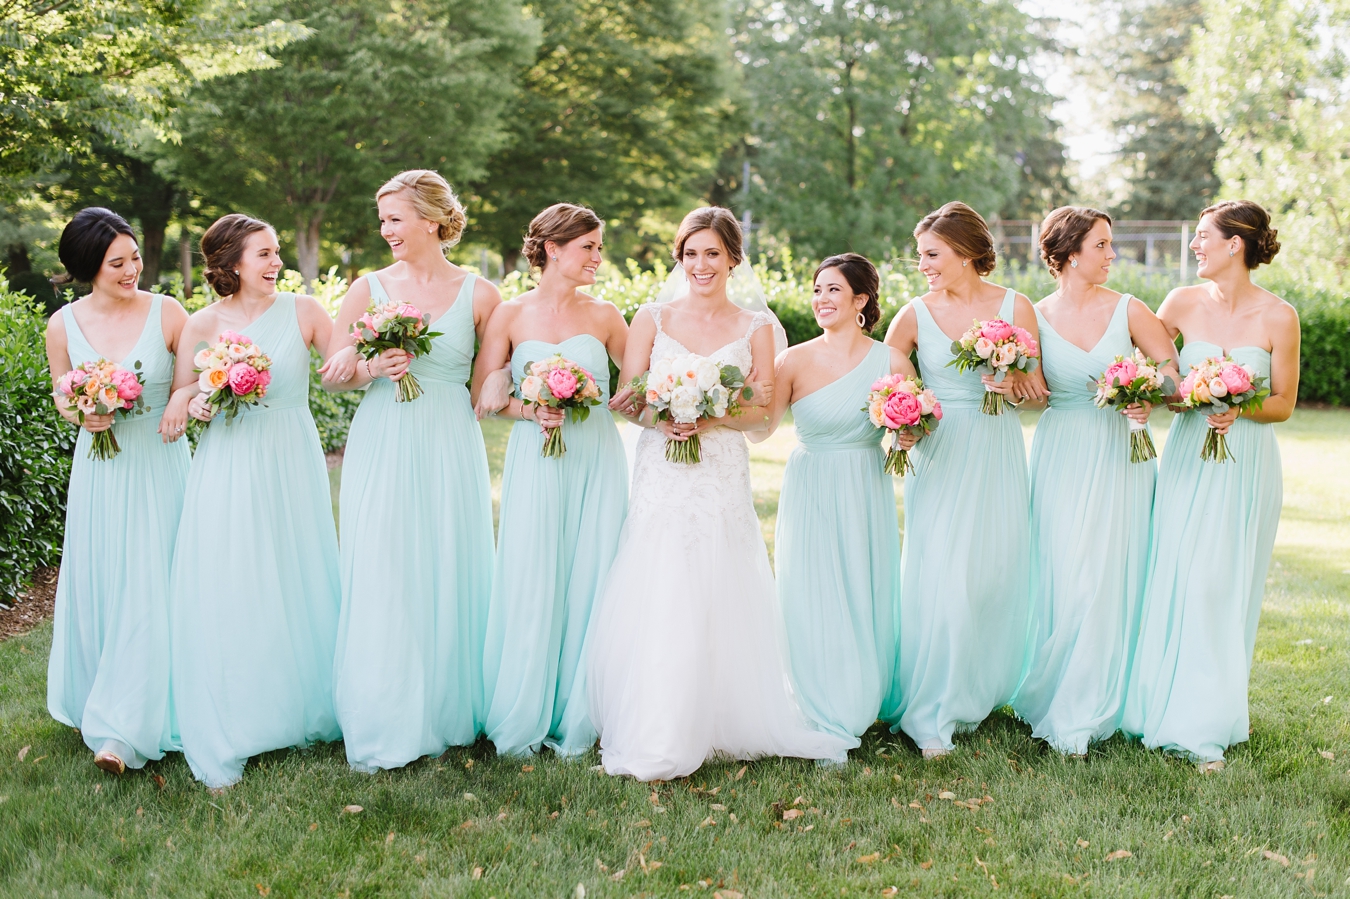 Teal J.Crew Bridesmaids Dresses and Romantic Peony Bouquets  | Natalie Franke Photography